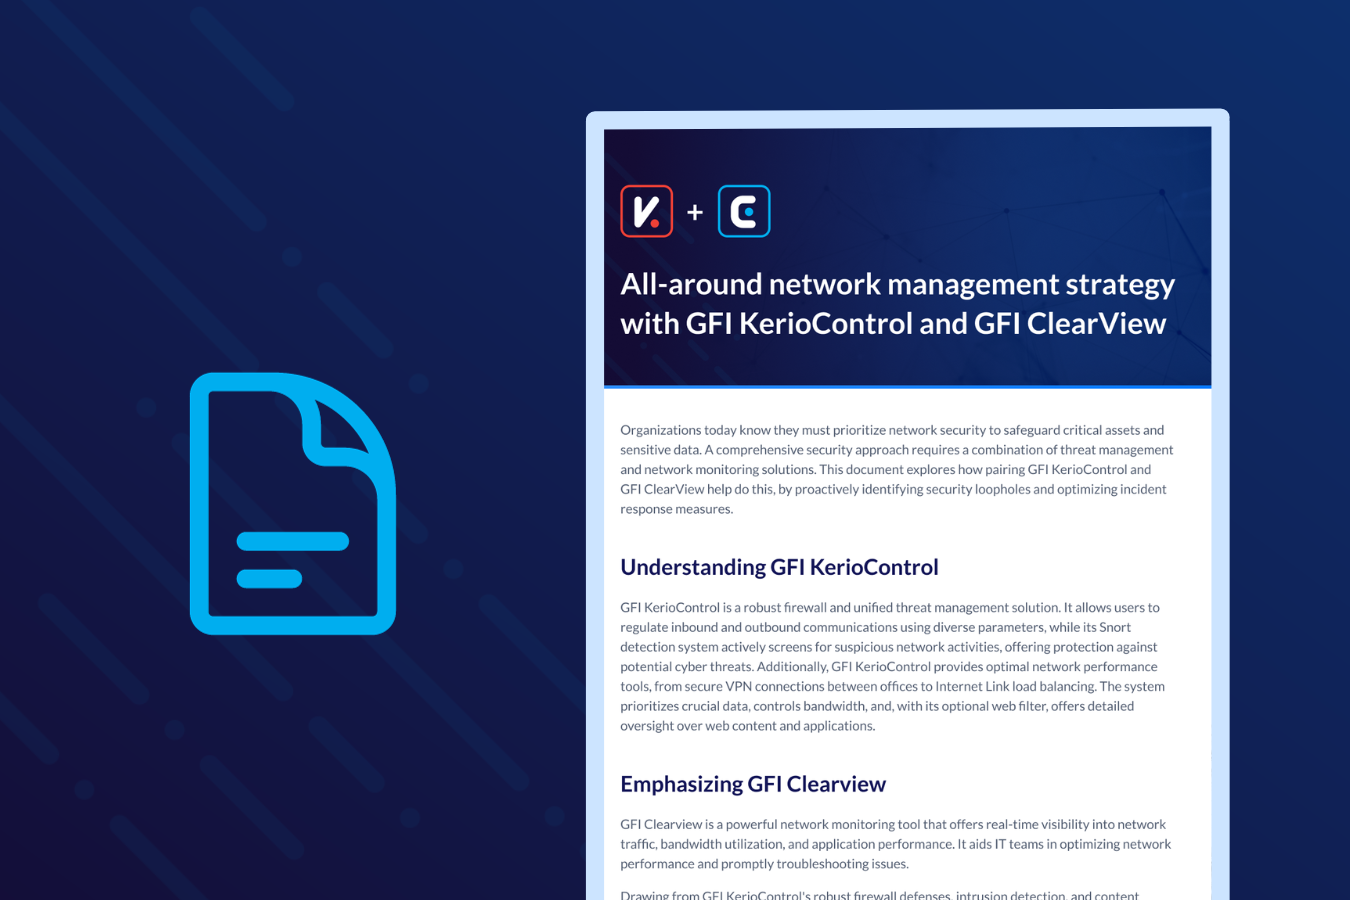 Network Management Strategy: KerioControl & ClearView